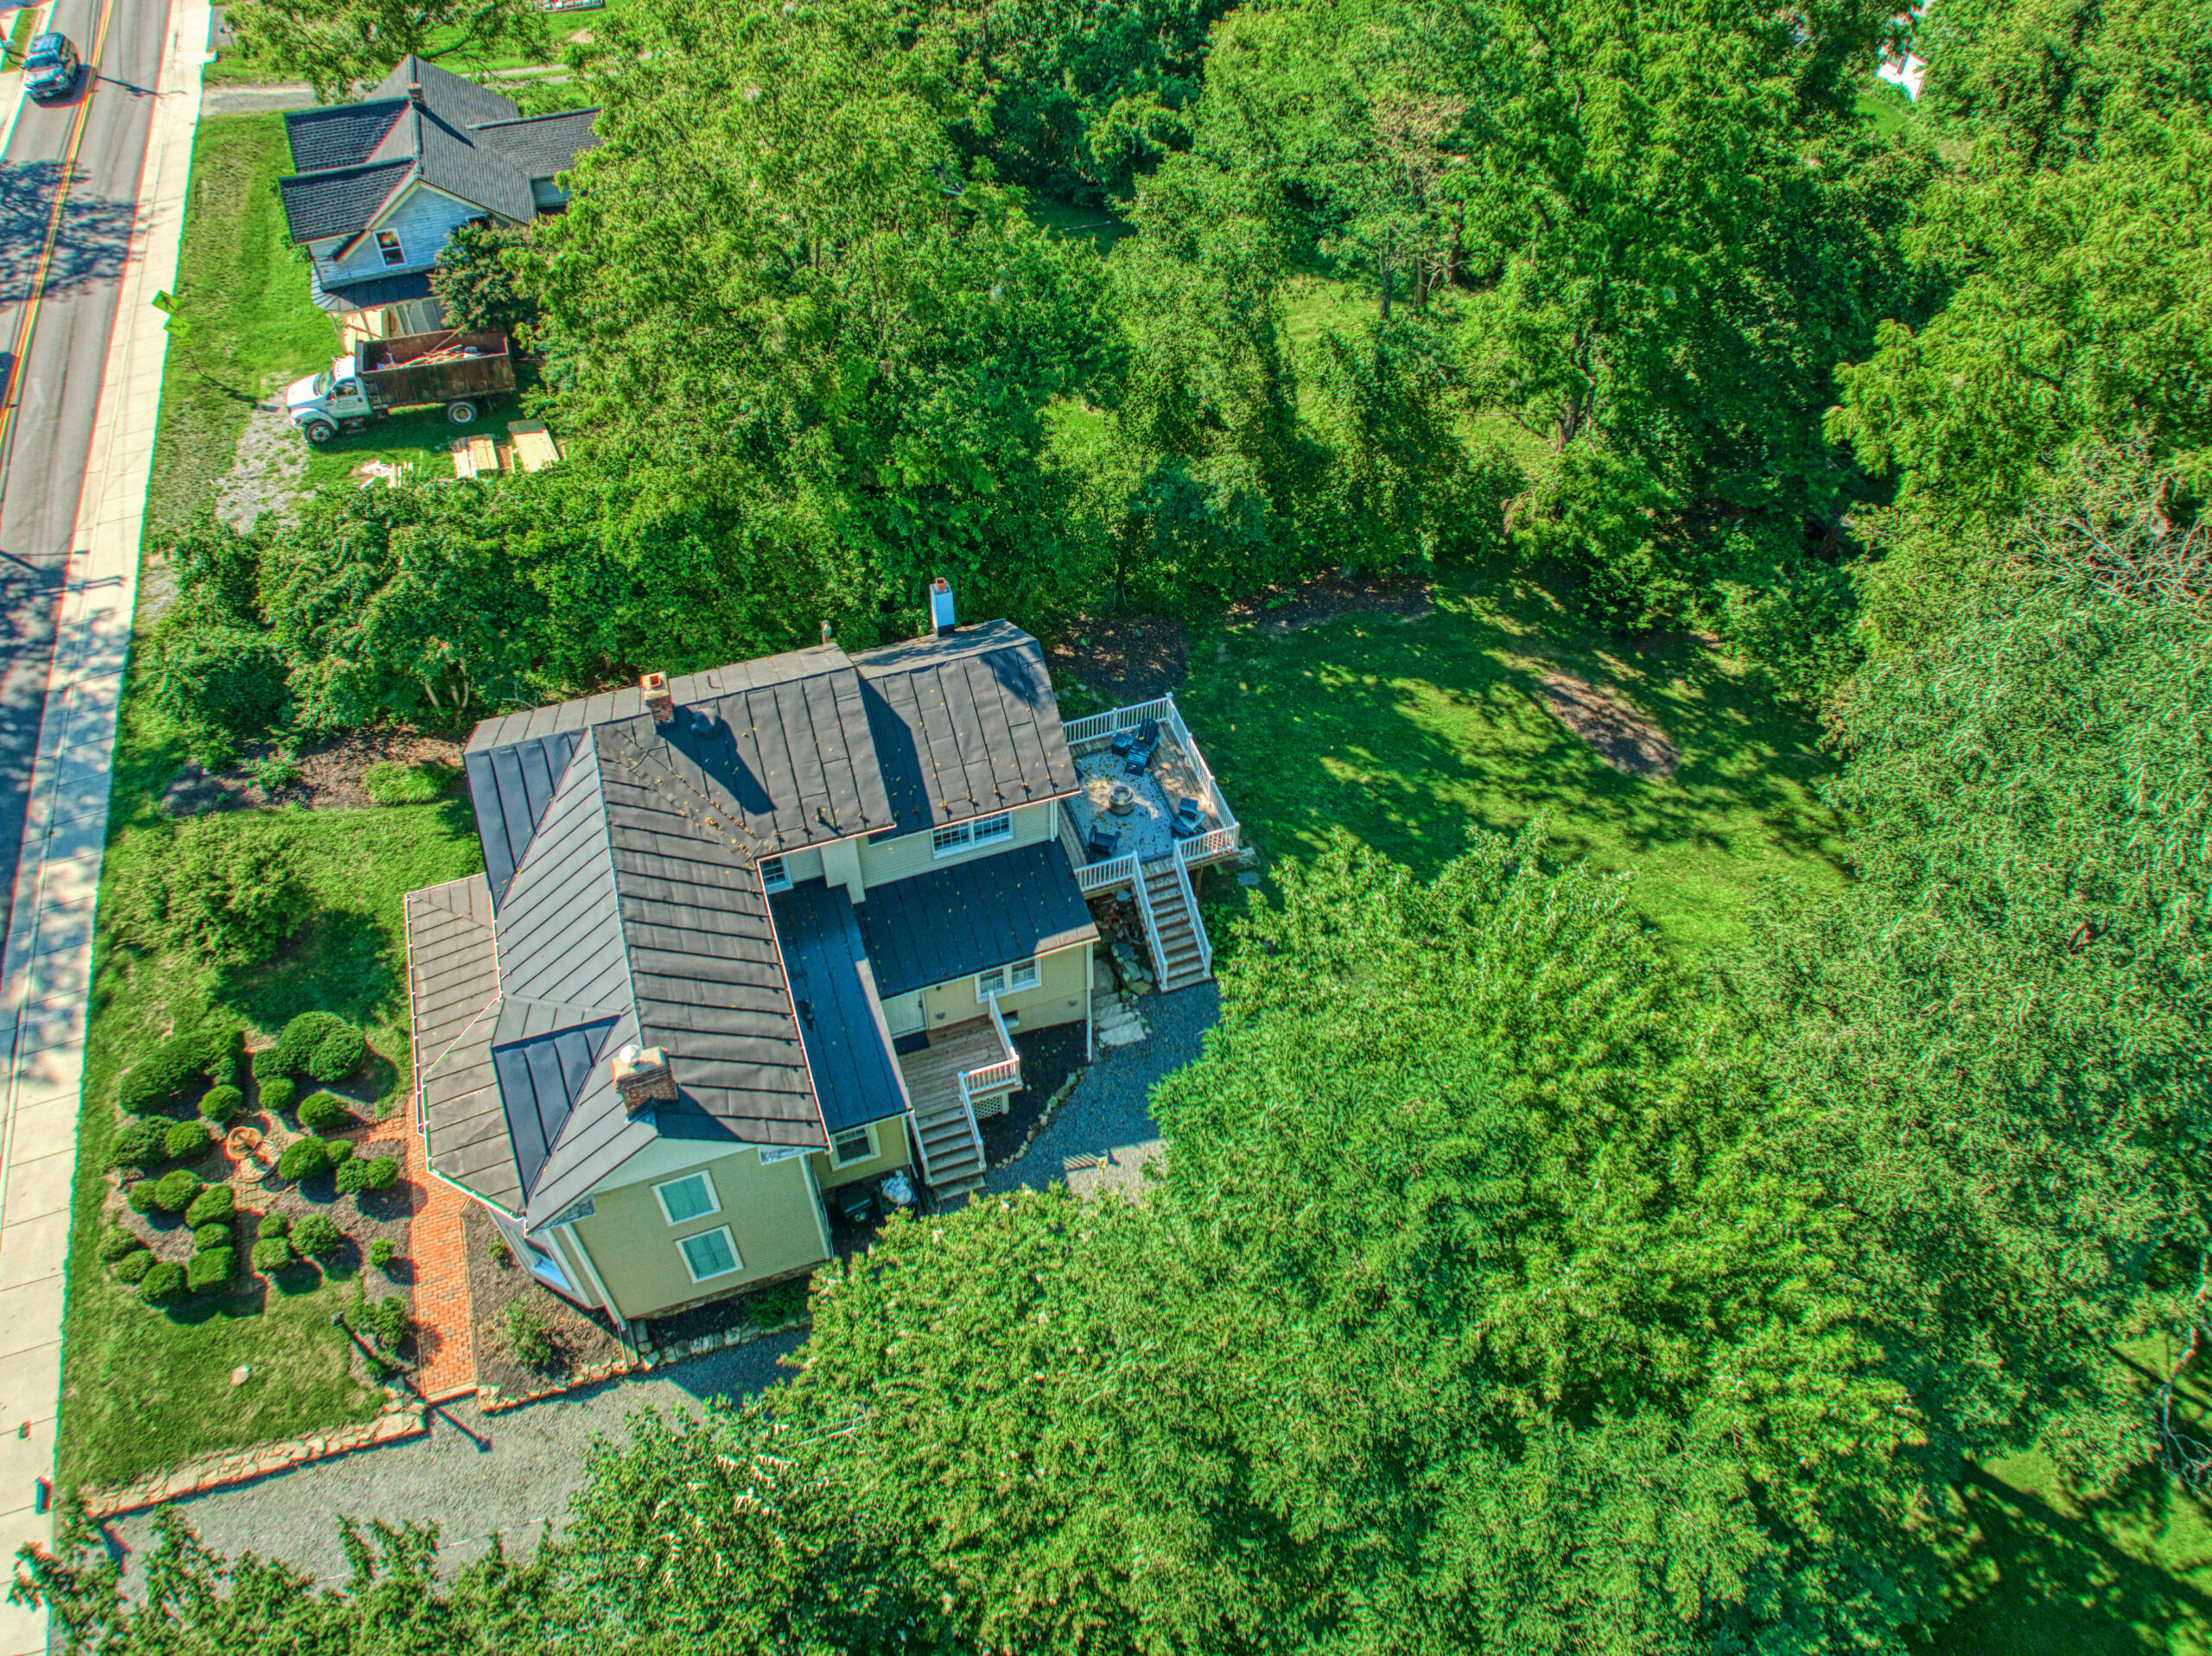 Aerial view taken with a drone of historic home in Hamilton, Virginia showing the unique shape of the home.